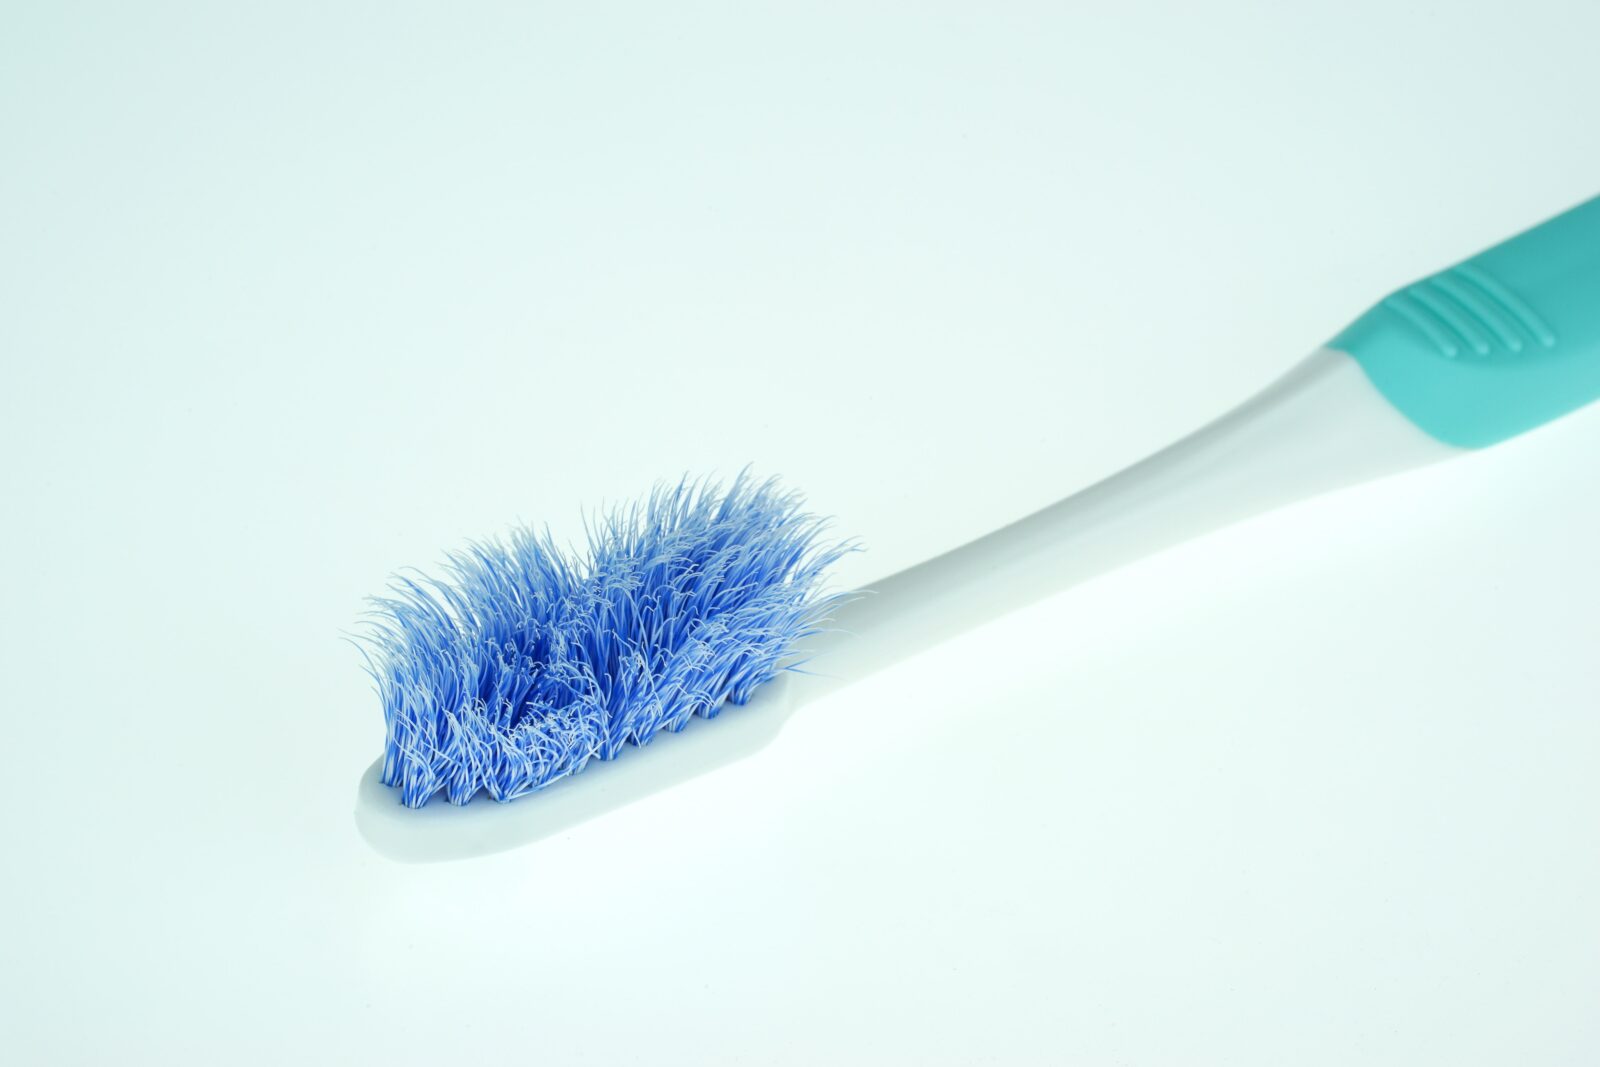 old toothbrush with frayed bristles